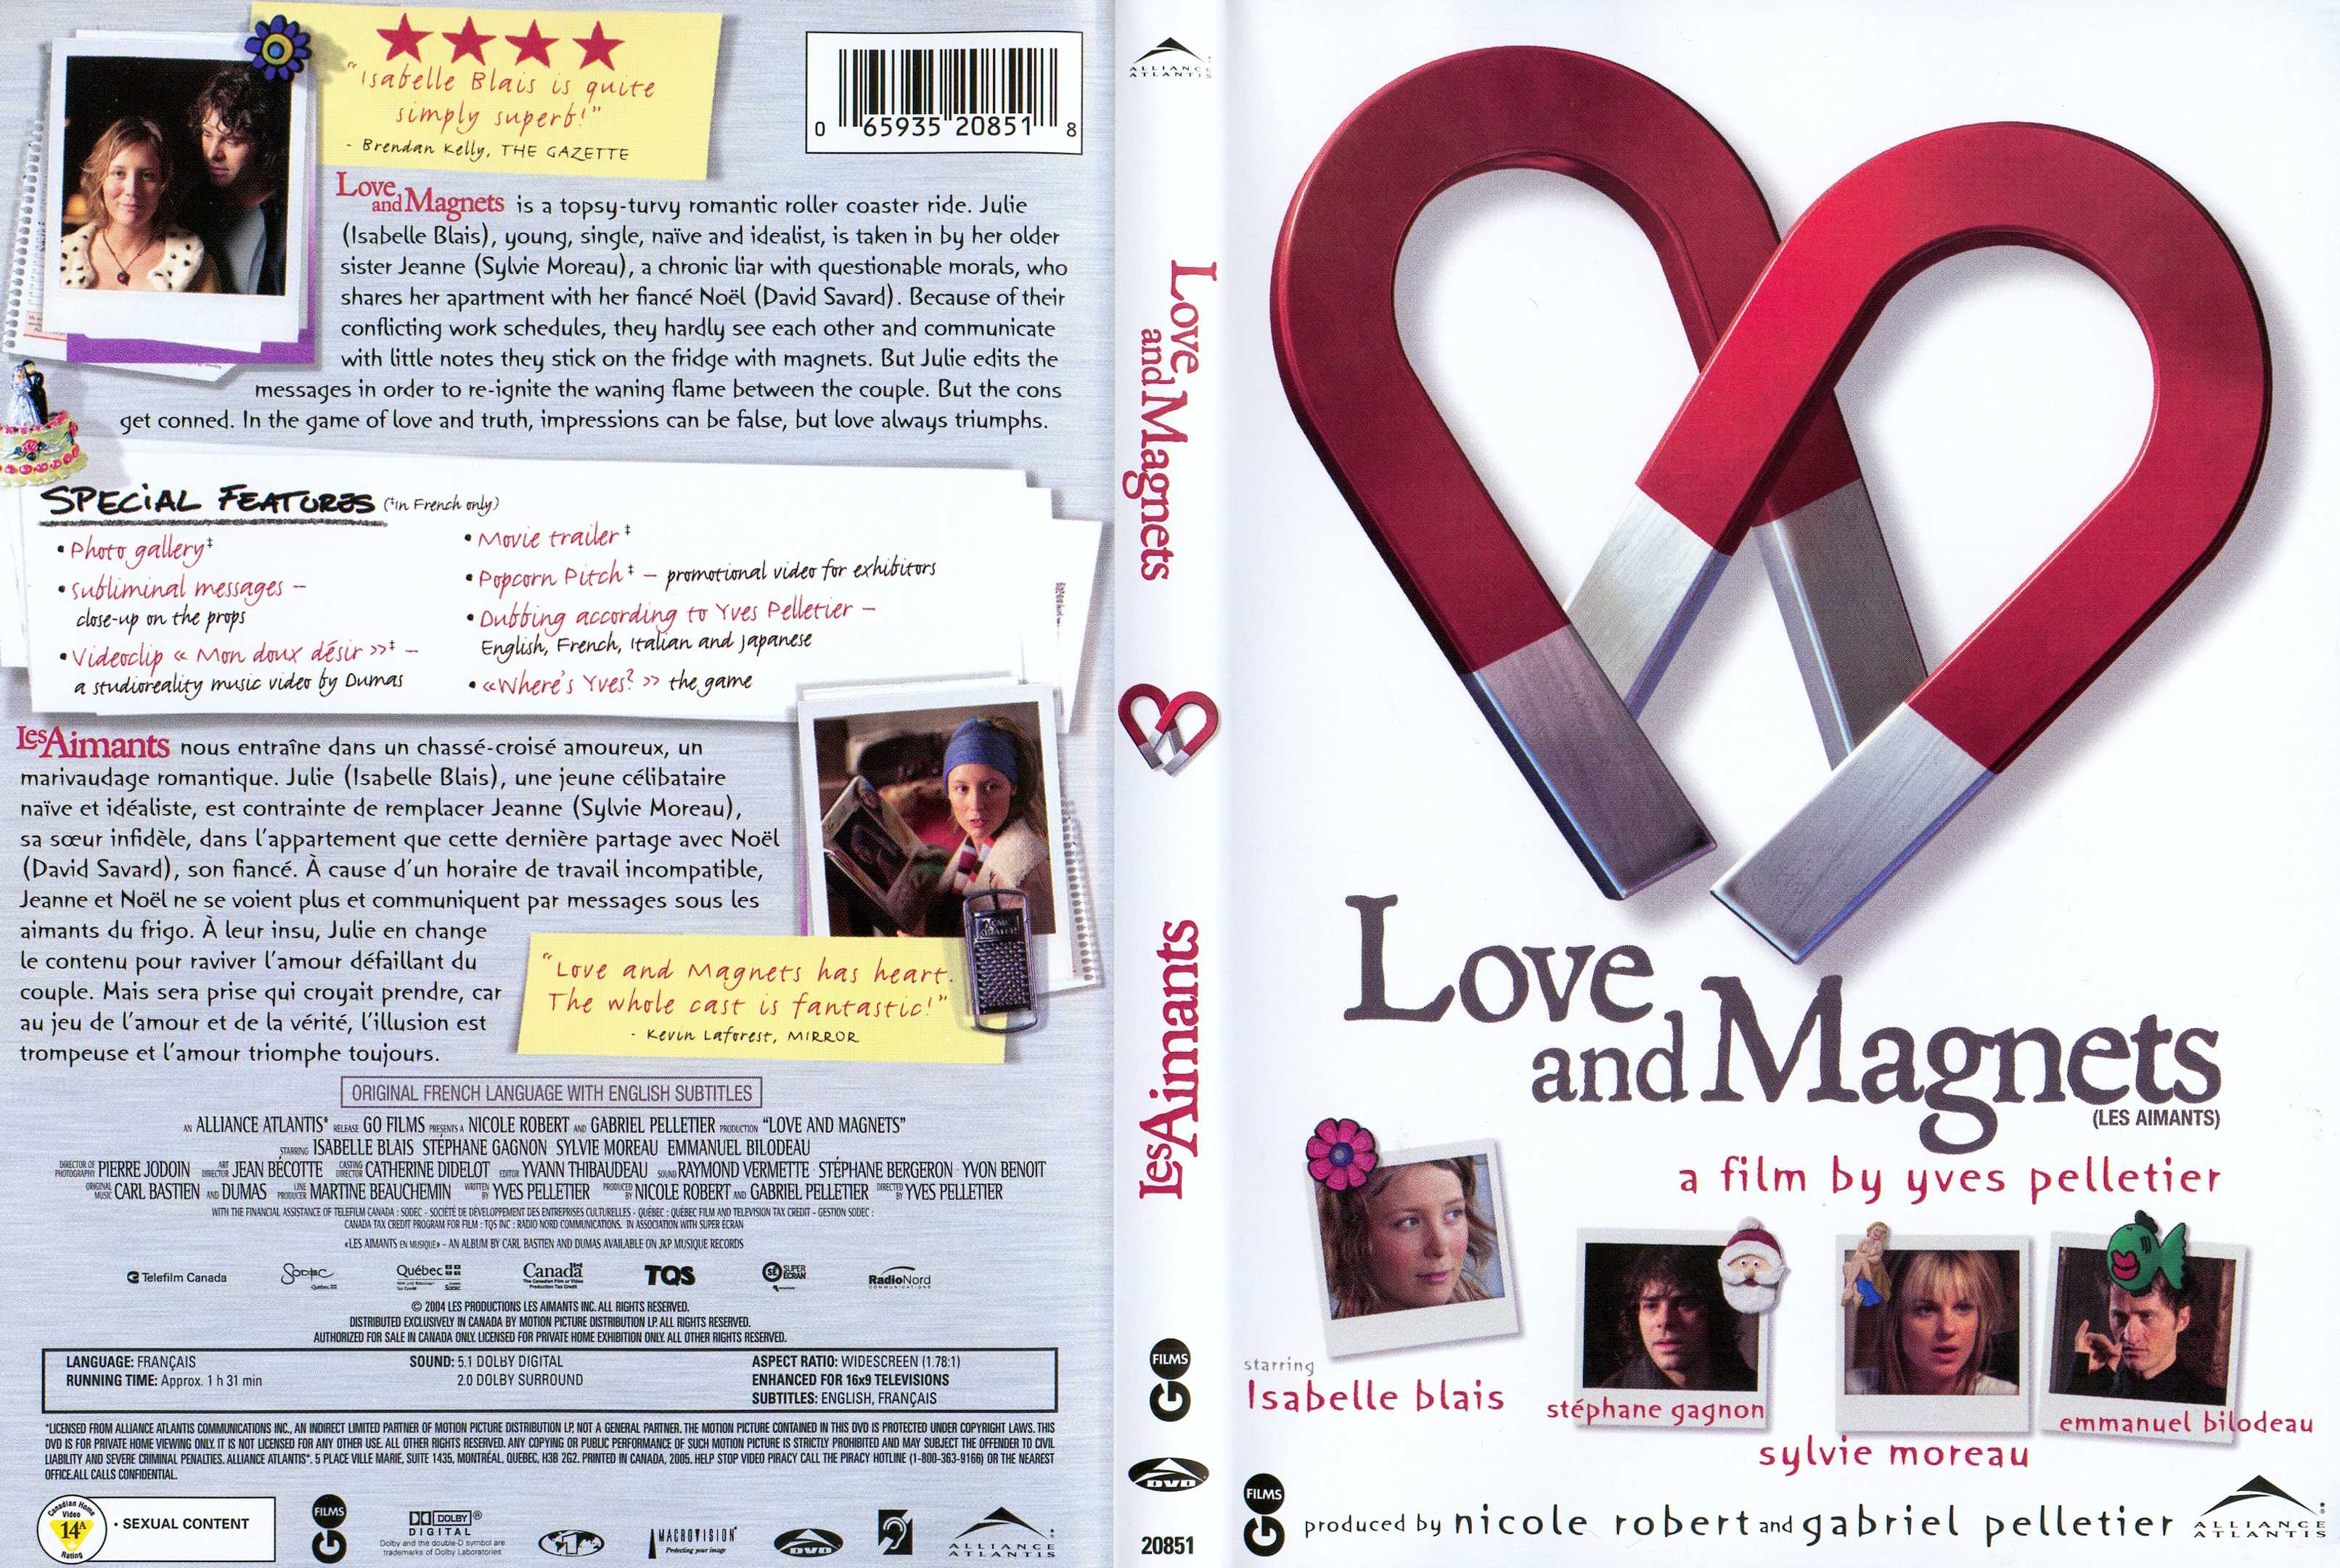 Jaquette DVD Love and magnets